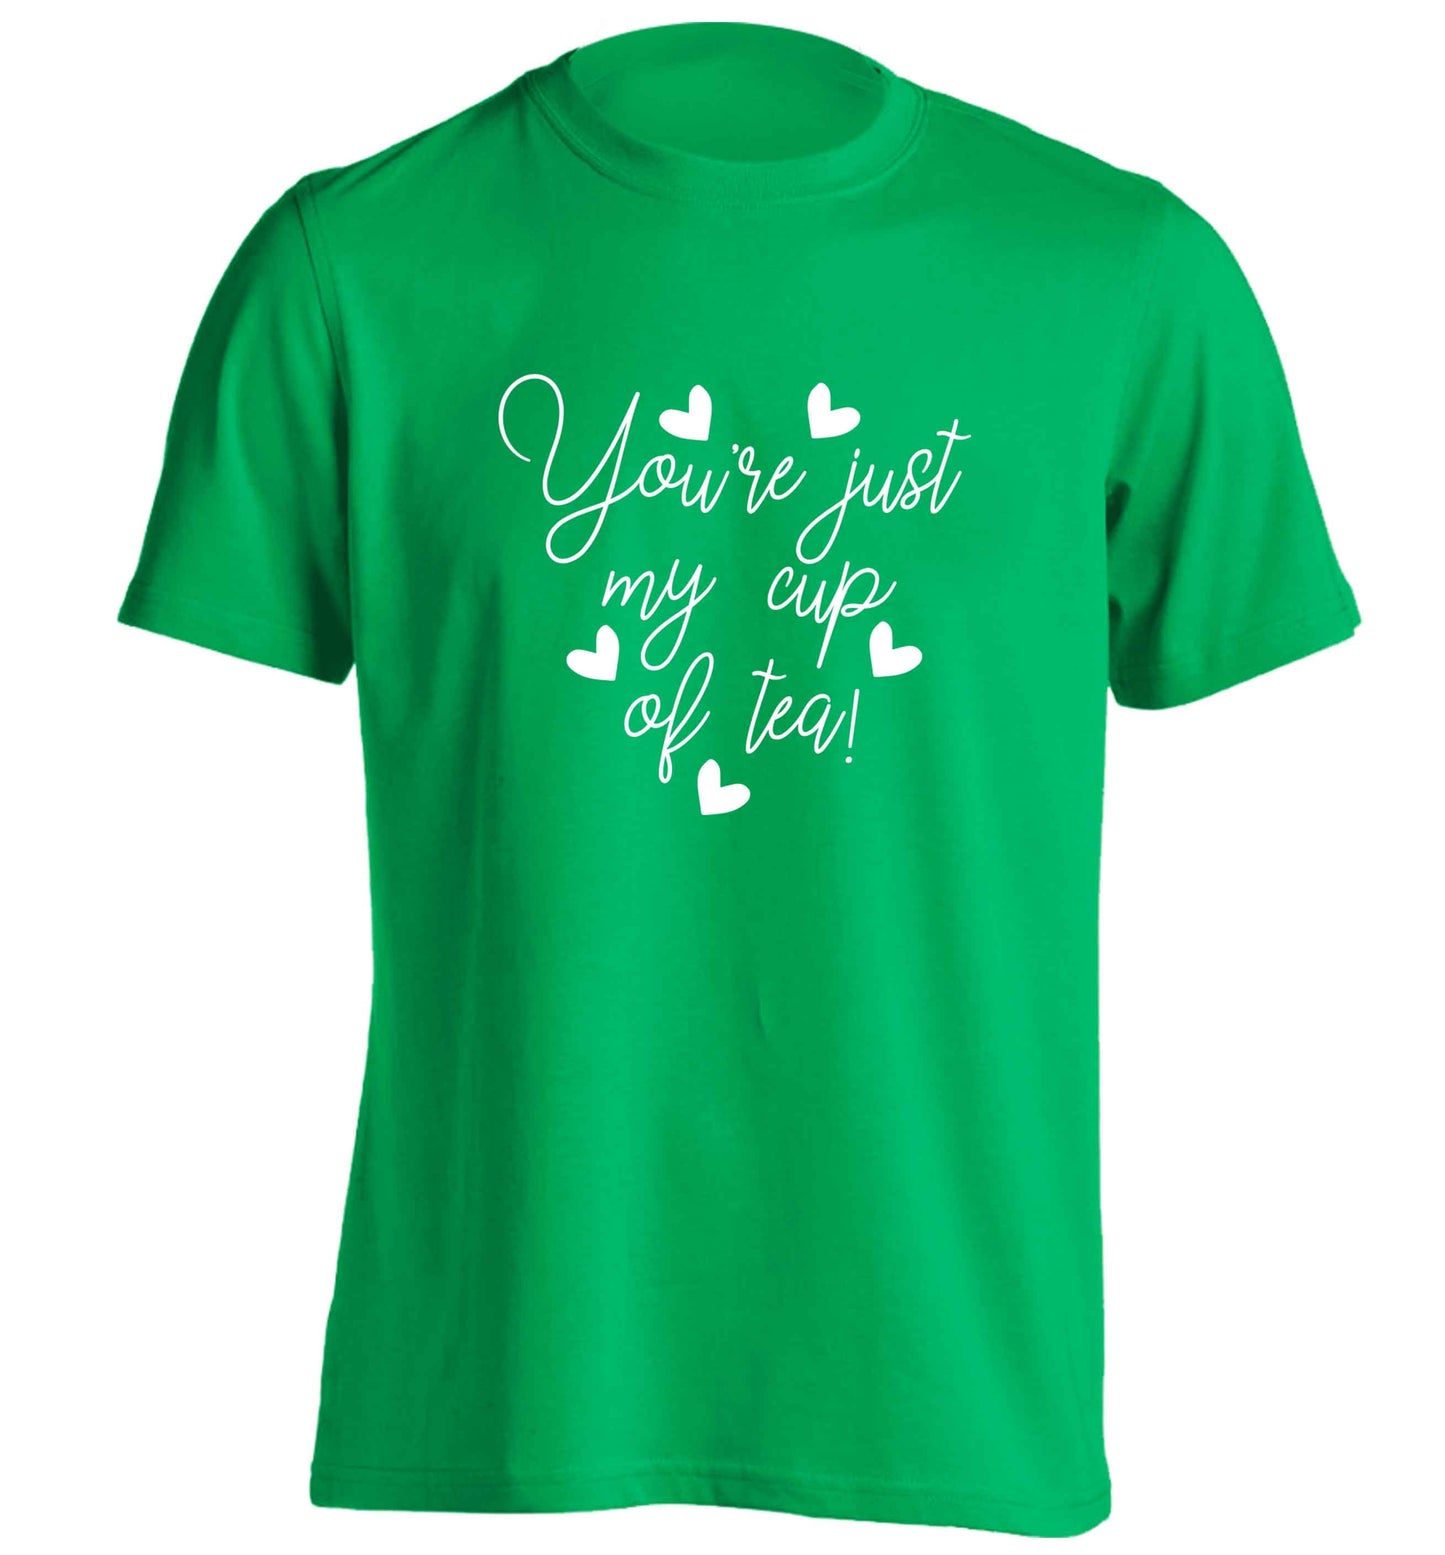 You're just my cup of tea adults unisex green Tshirt 2XL